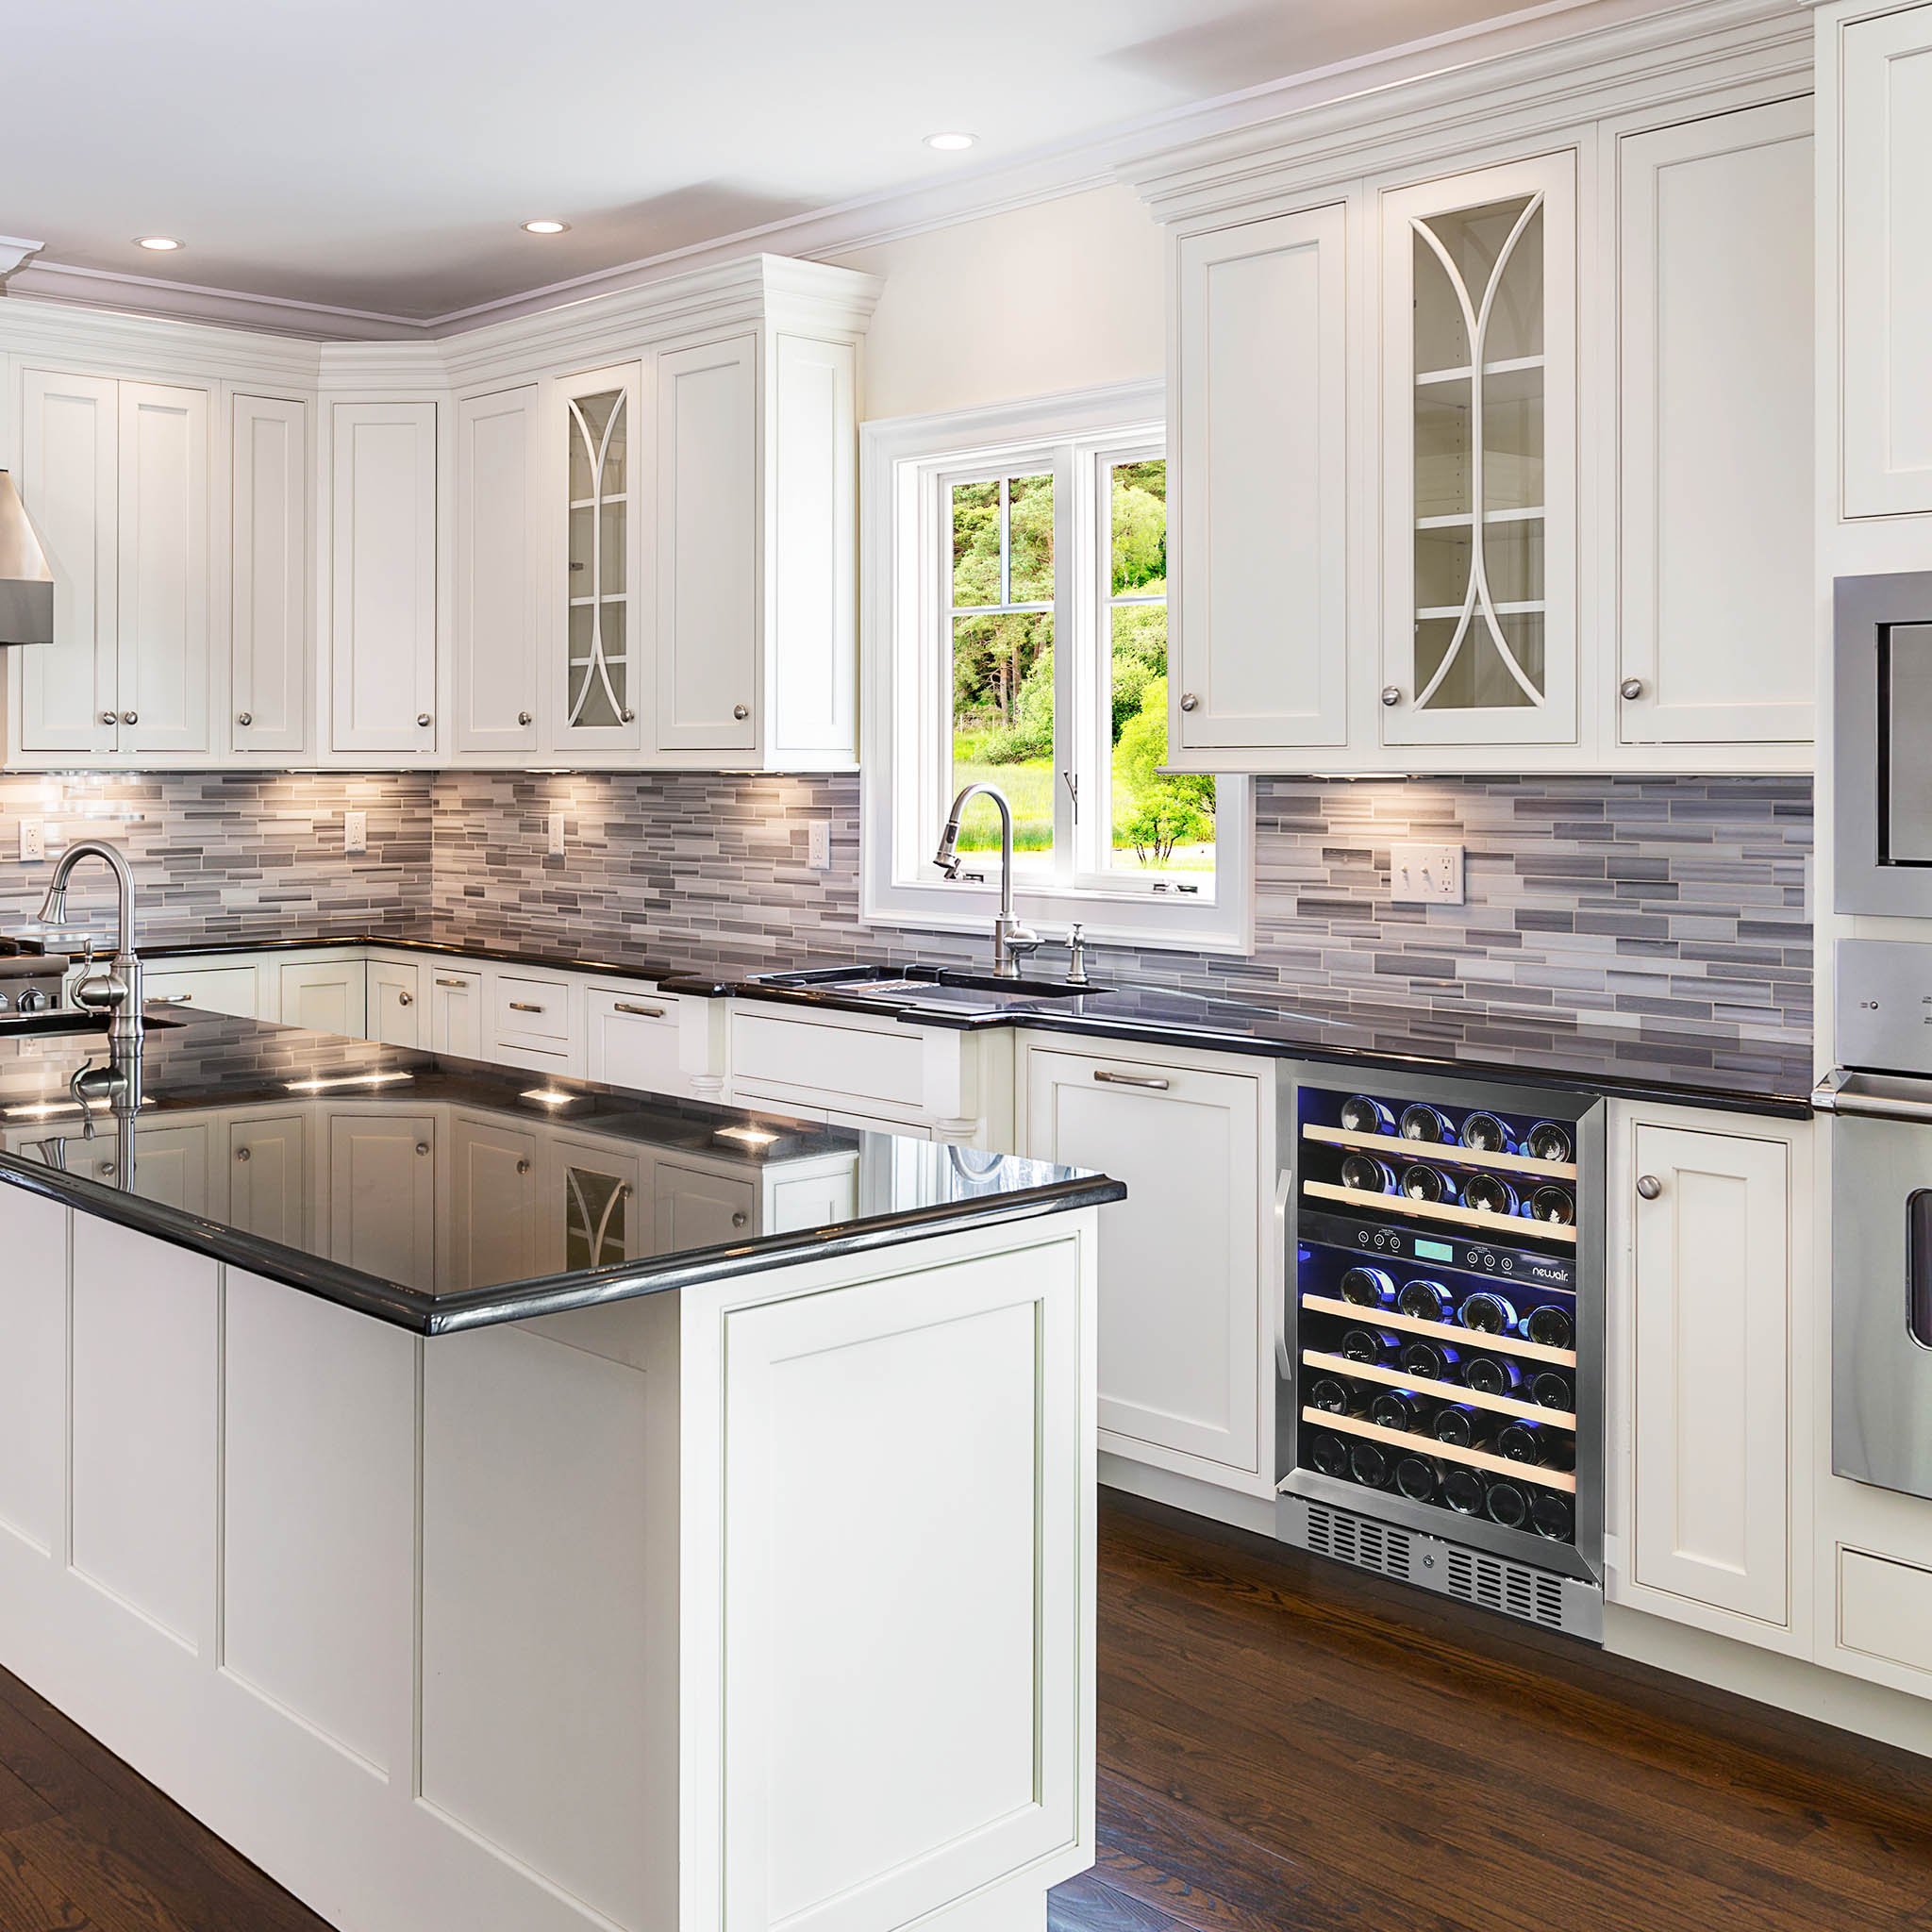 20 Best Kitchen Remodeling Ideas To Renovate Your Kitchen   Foyr